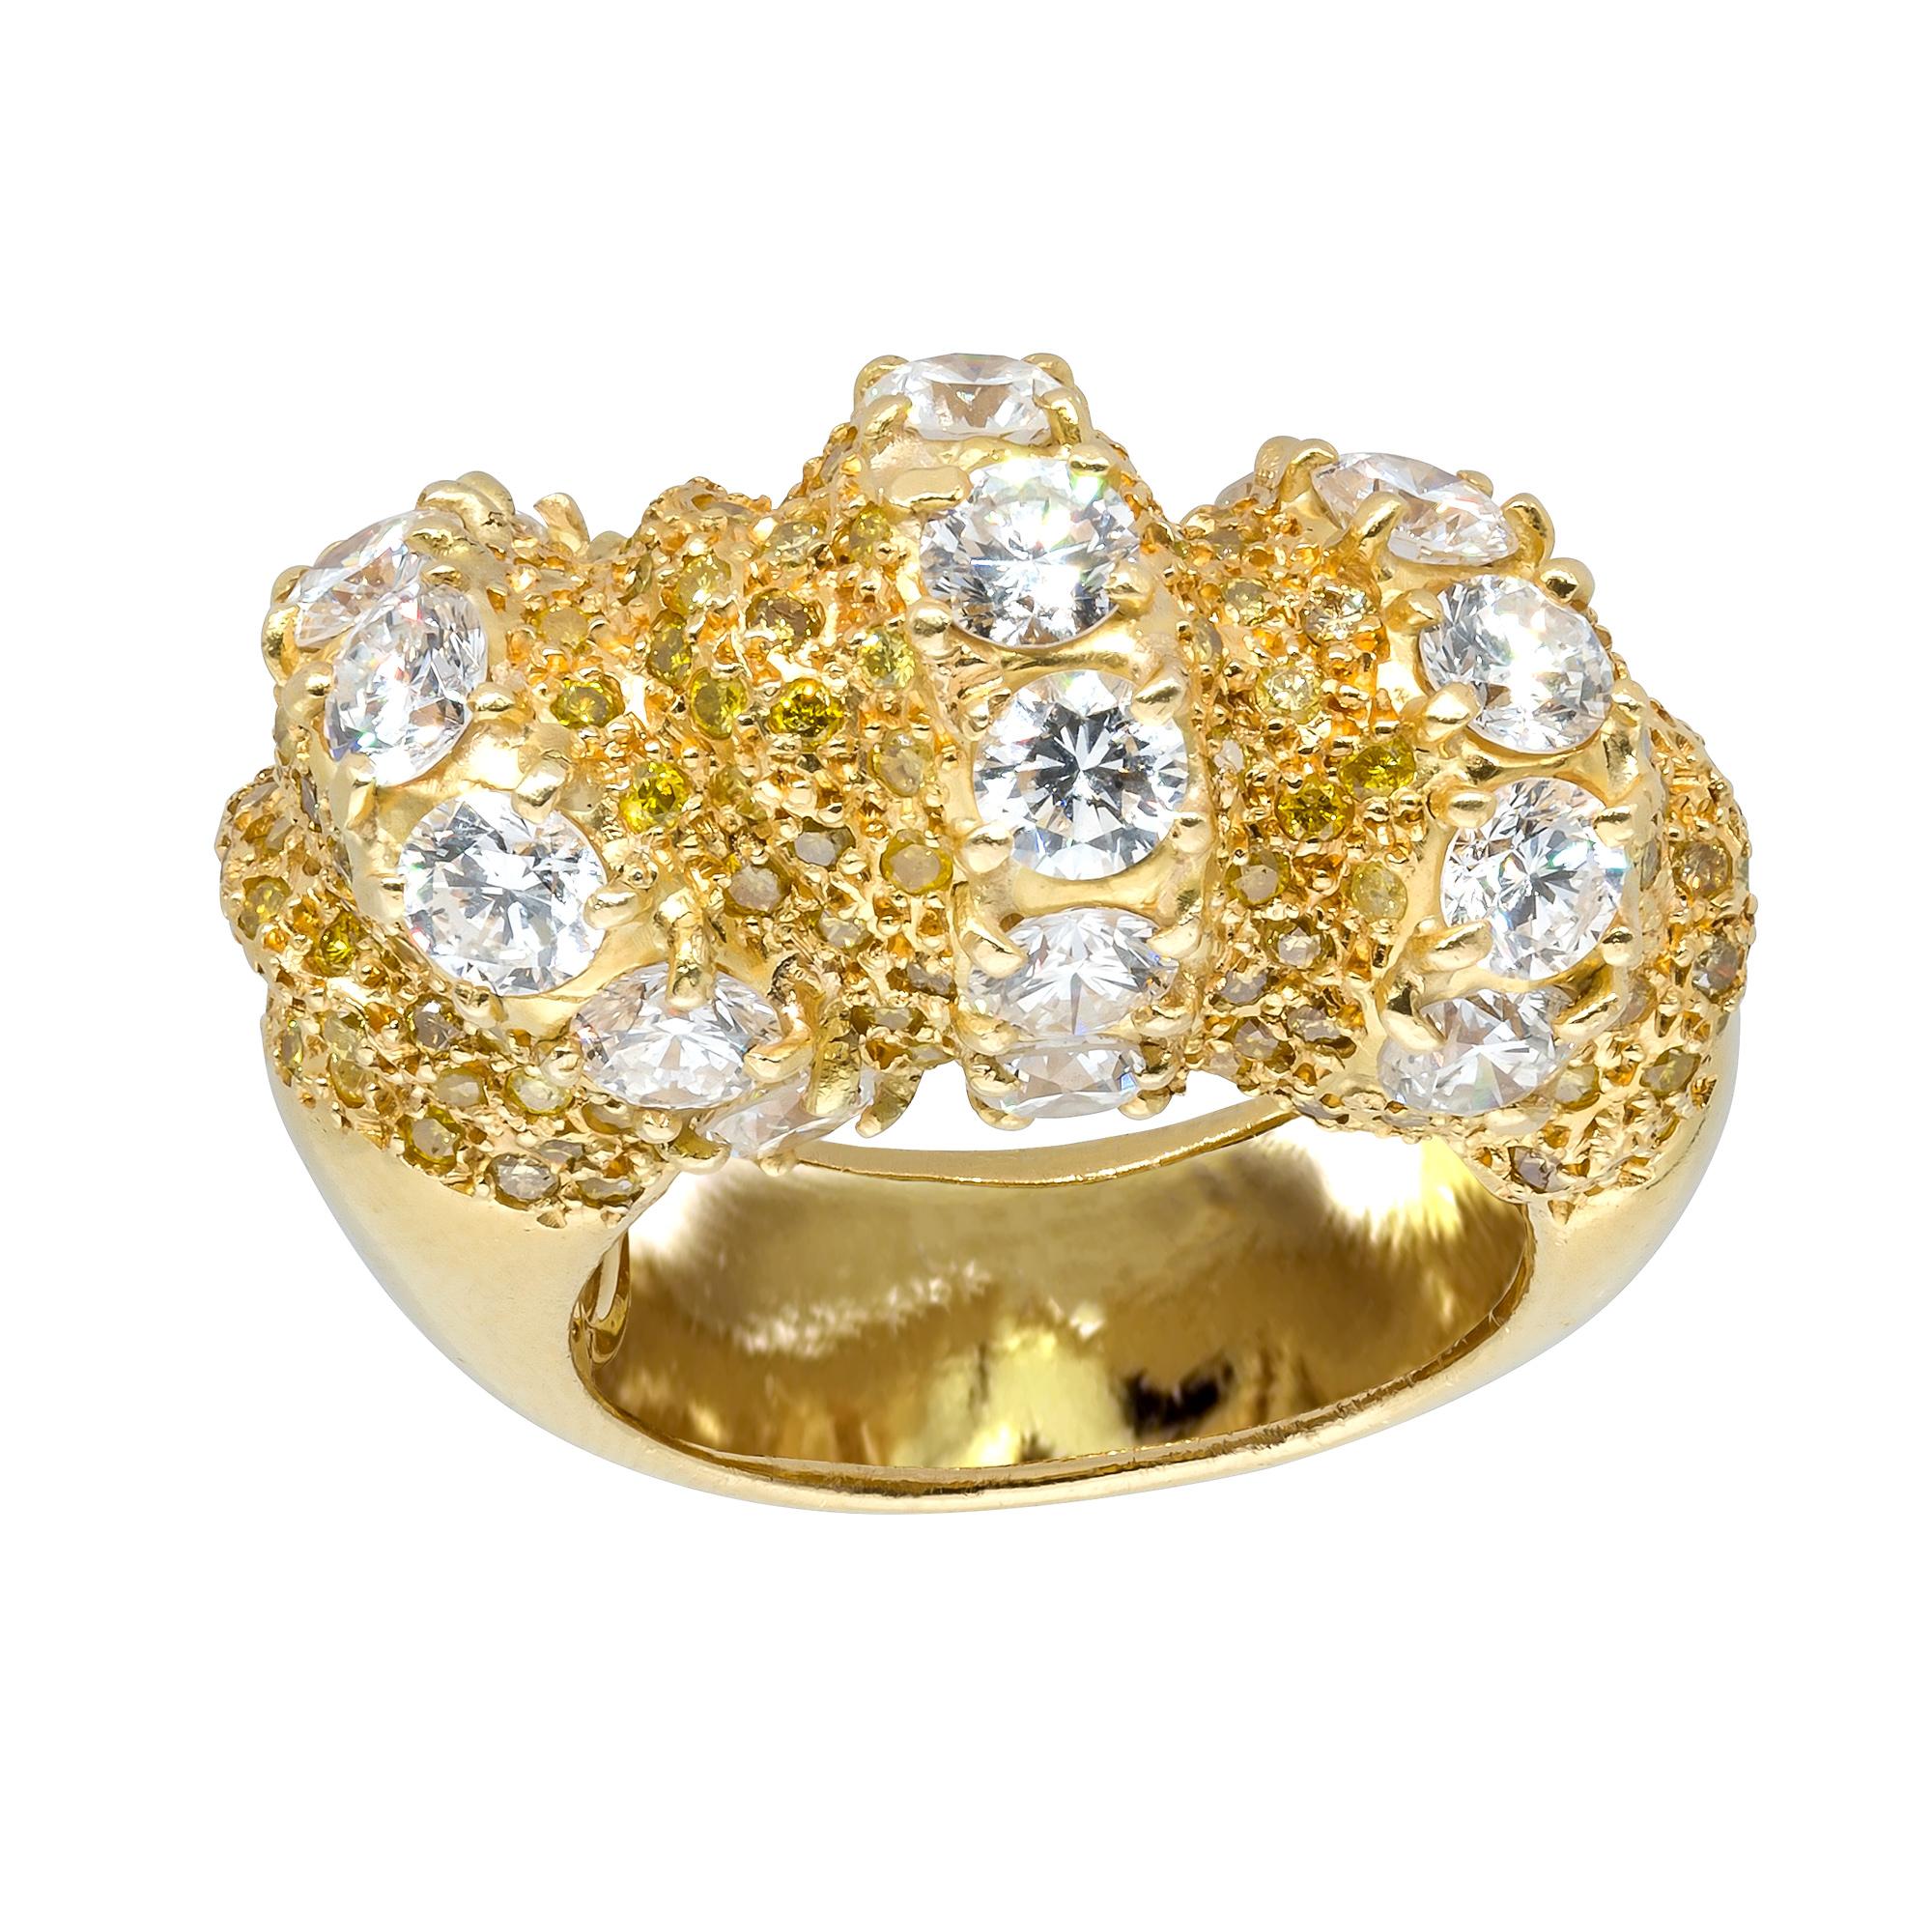 D'Avossa Ring in White and Yellow Diamonds For Sale 2